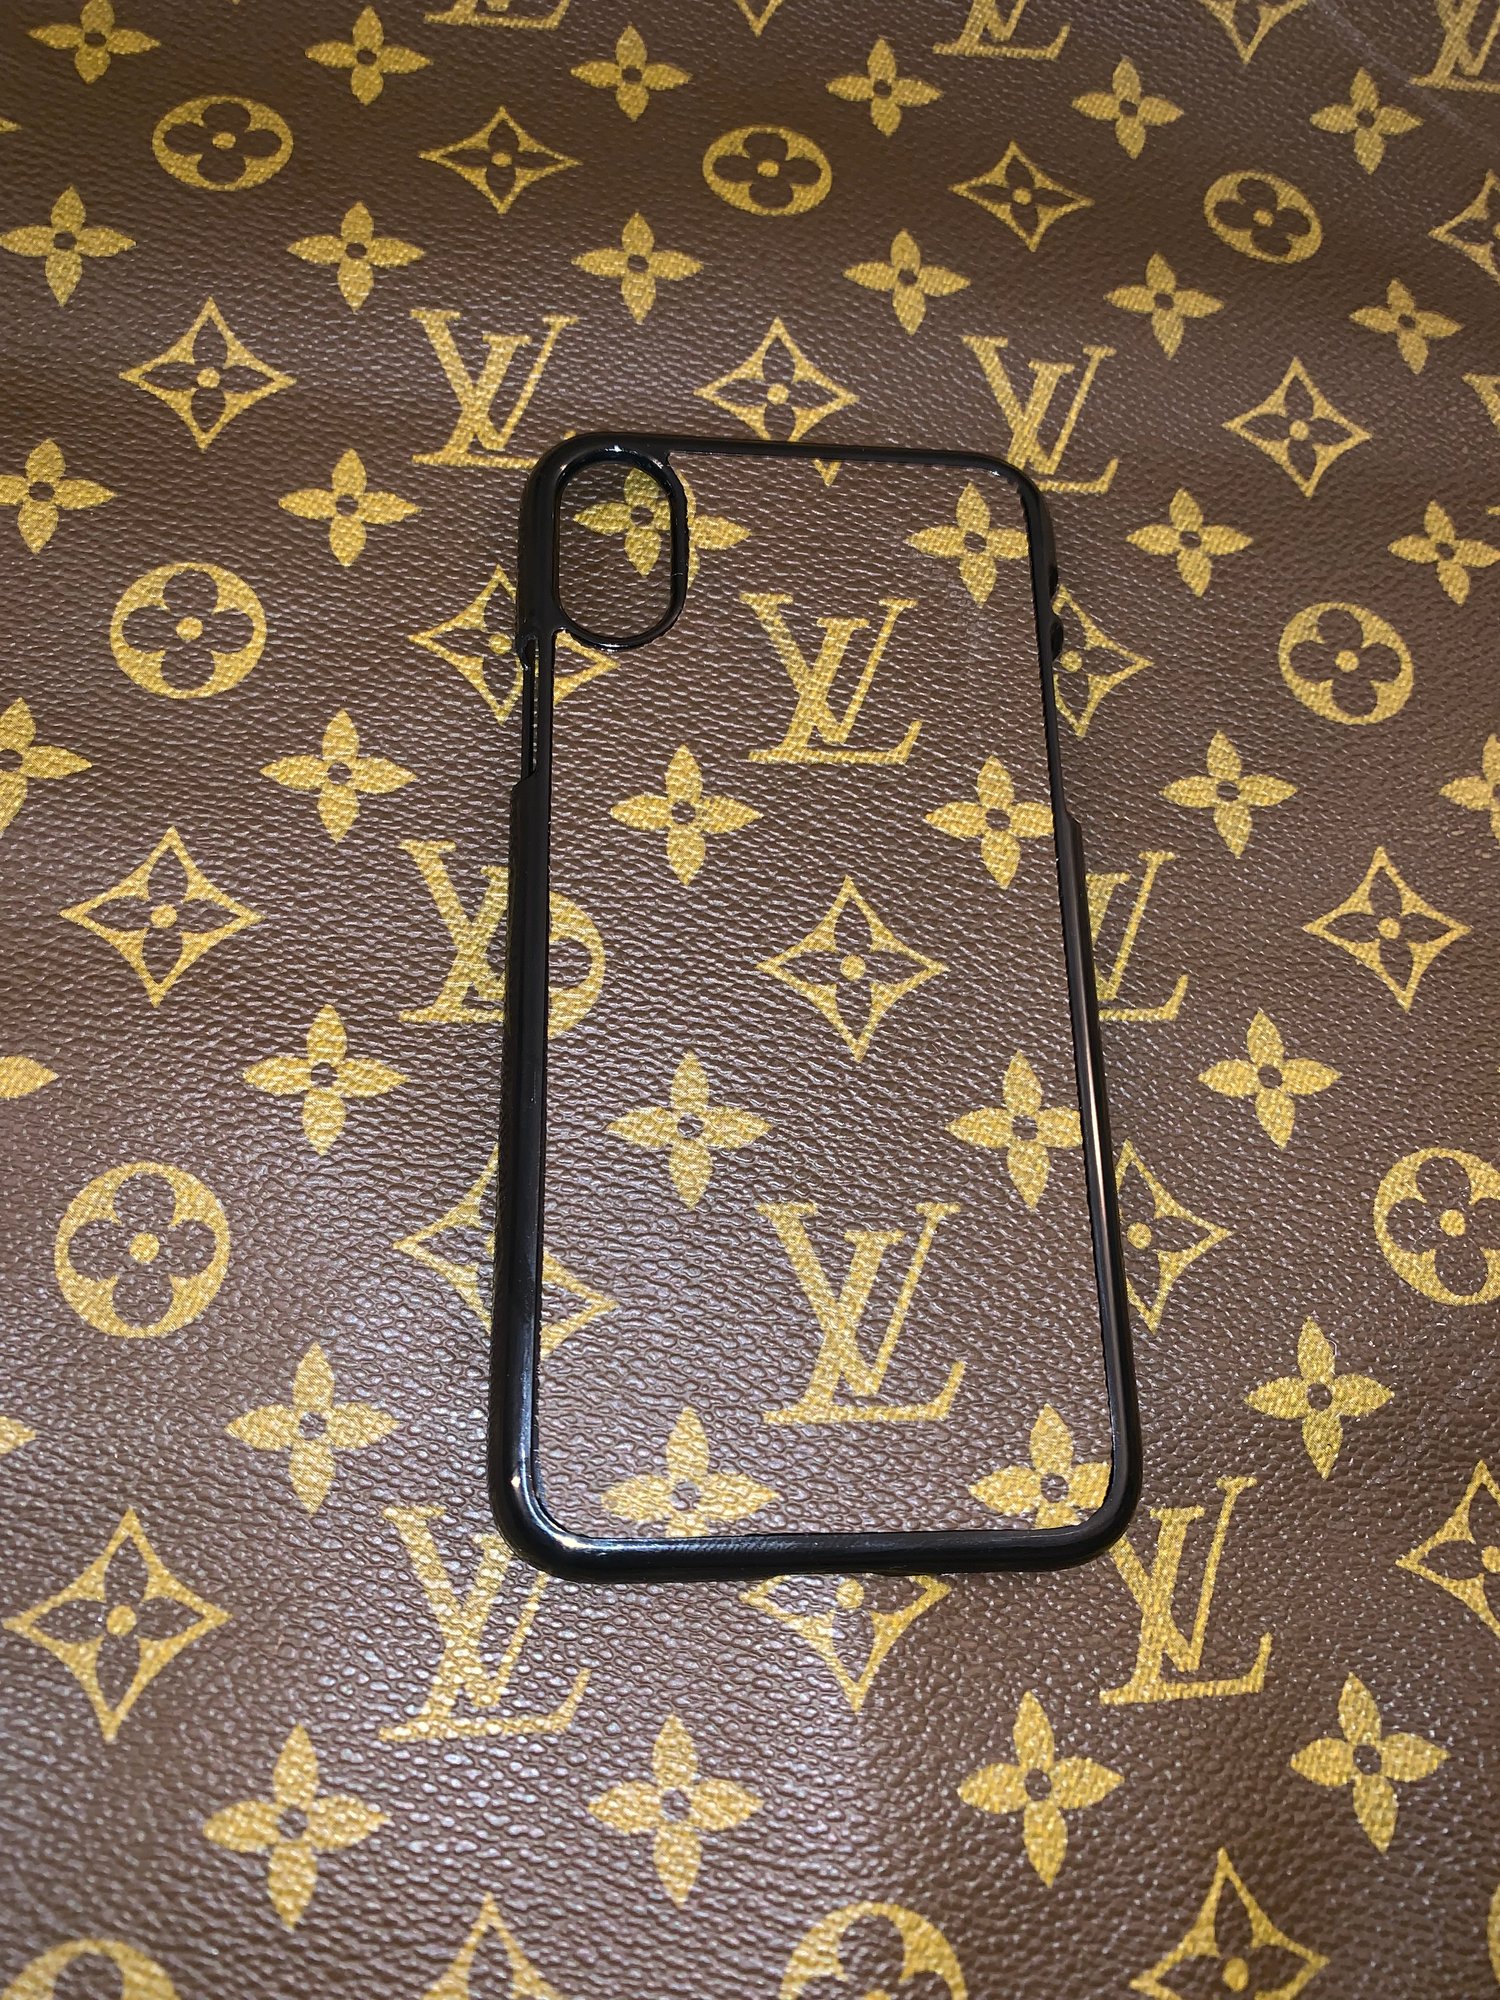 lv case for iphone x